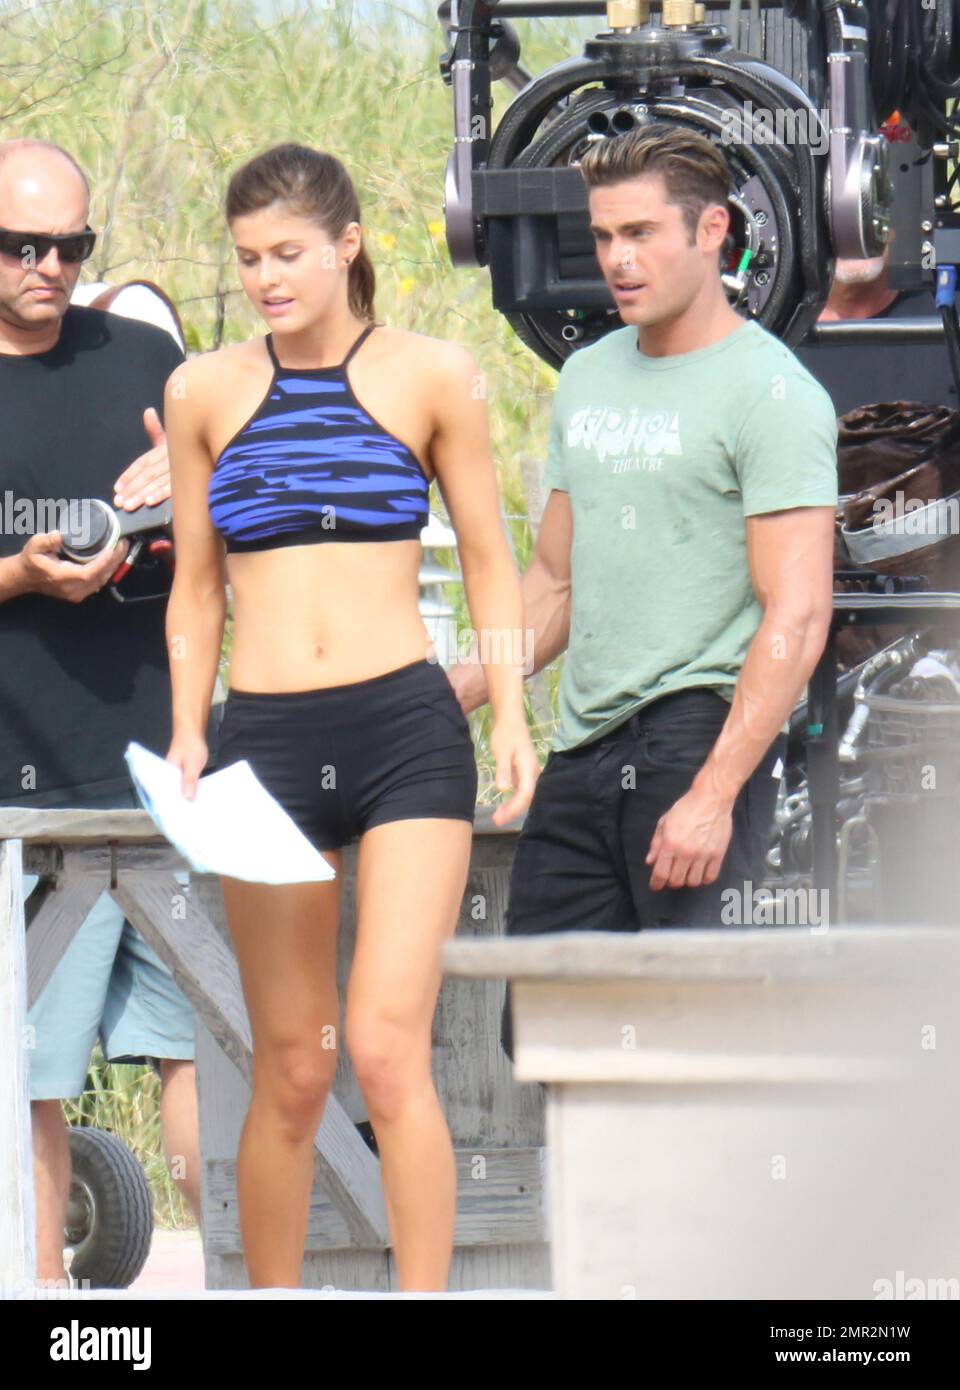 WORLDWIDE - Alexandra Daddario and Zac Efron in costume on the set of the  Baywatch movie being filmed in California. 5th March, 2016 Stock Photo -  Alamy